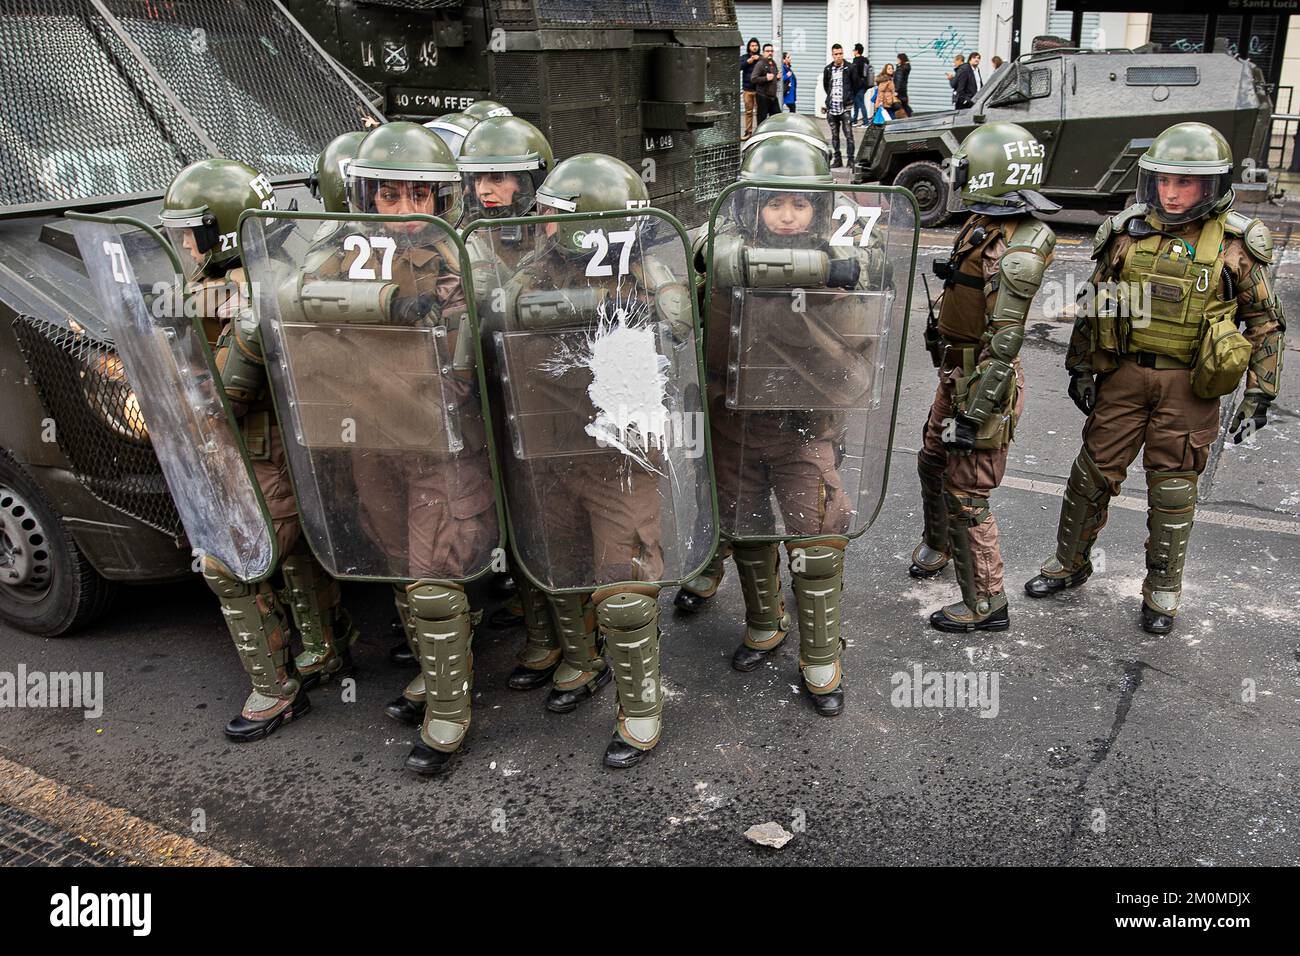 Female riot police officers at a student demonstration on Avenida Libertador Bernardo O'Higgins. One of the officers received a ballon of white paint. Stock Photo